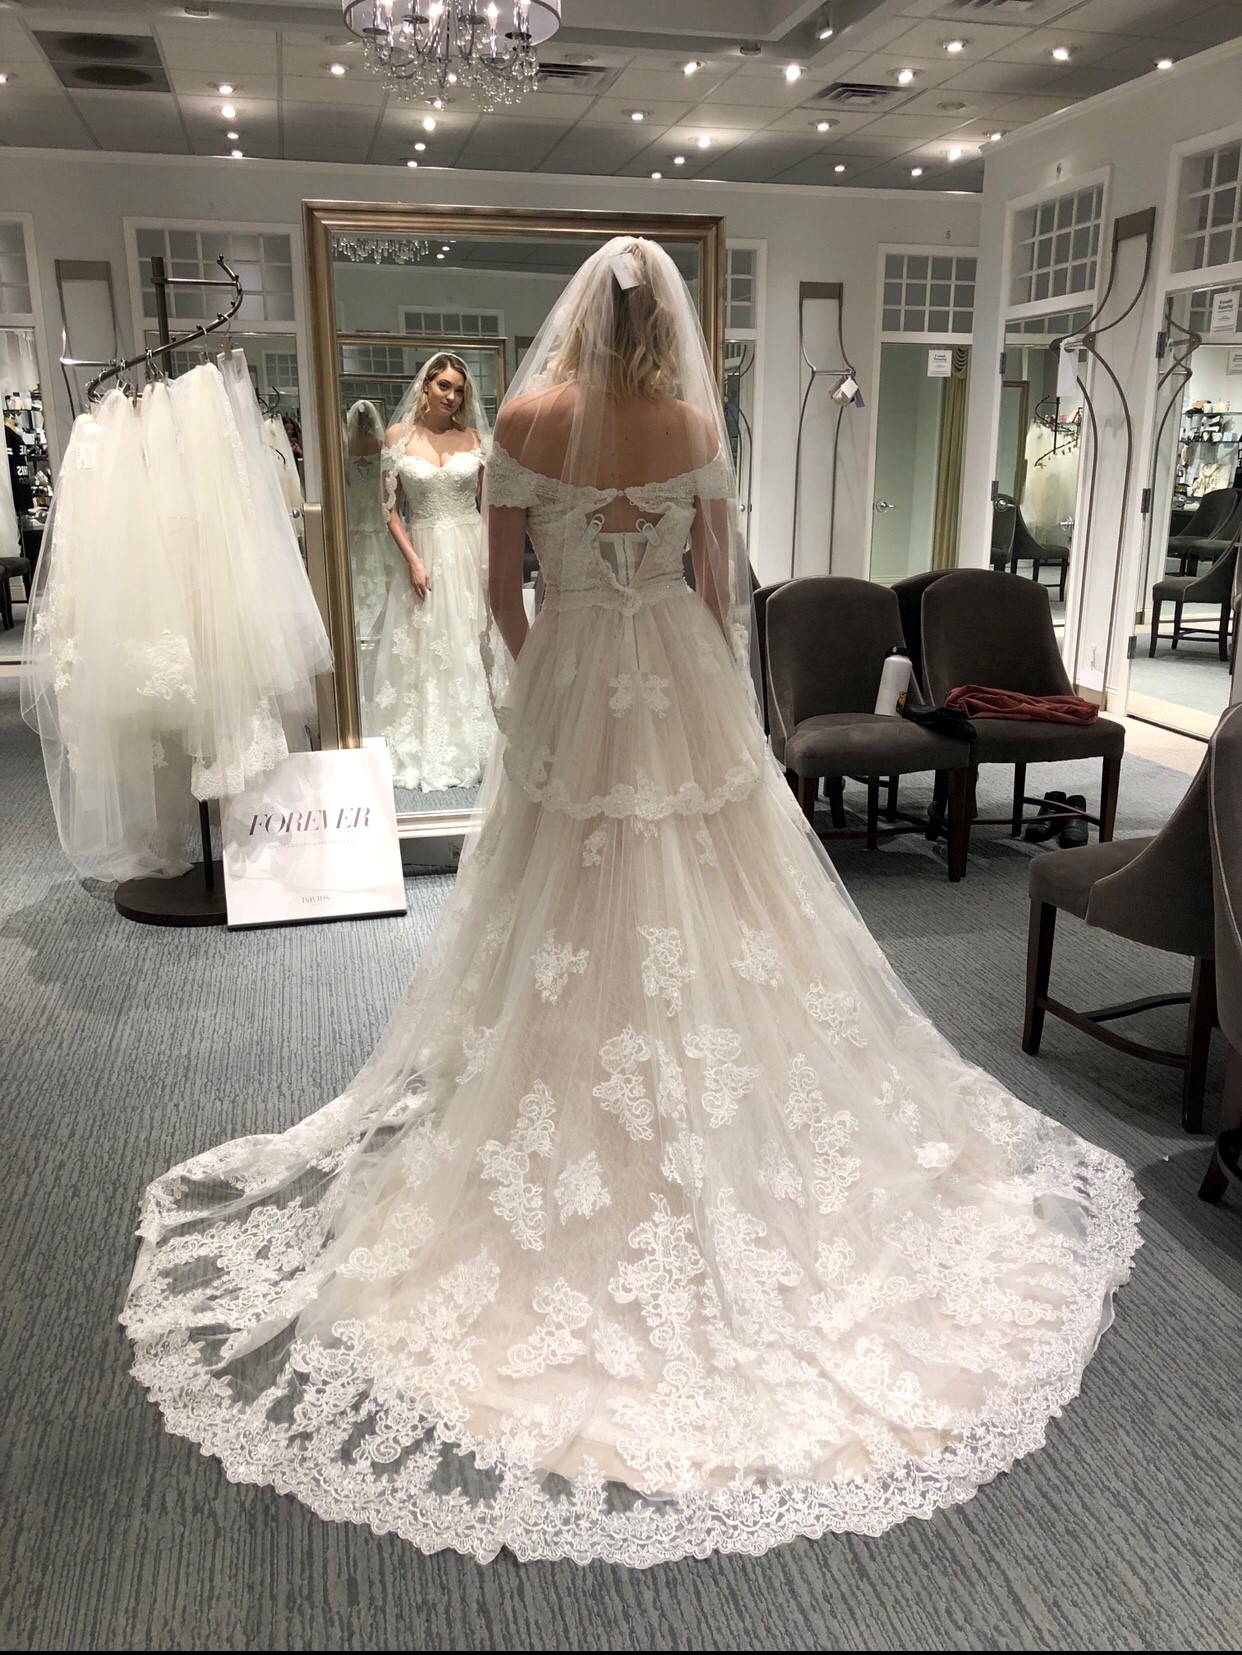 Real bride, model and body positive warrior Carrie Lane shops for her wedding dress at David's Bridal